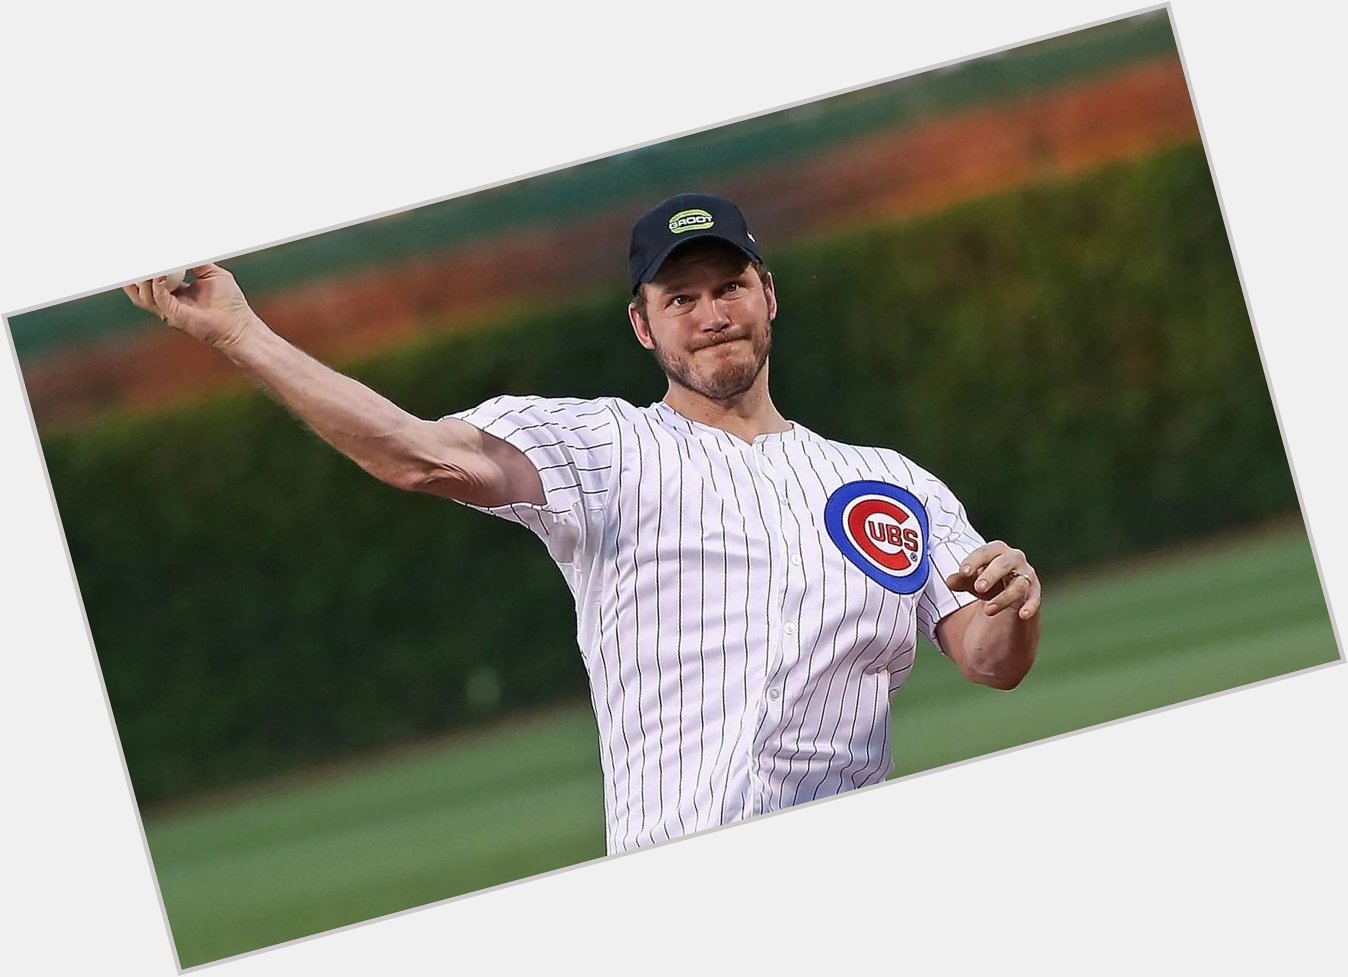 Happy 51st birthday to former Cubs pitcher (apparently) Scott Hatteberg! 